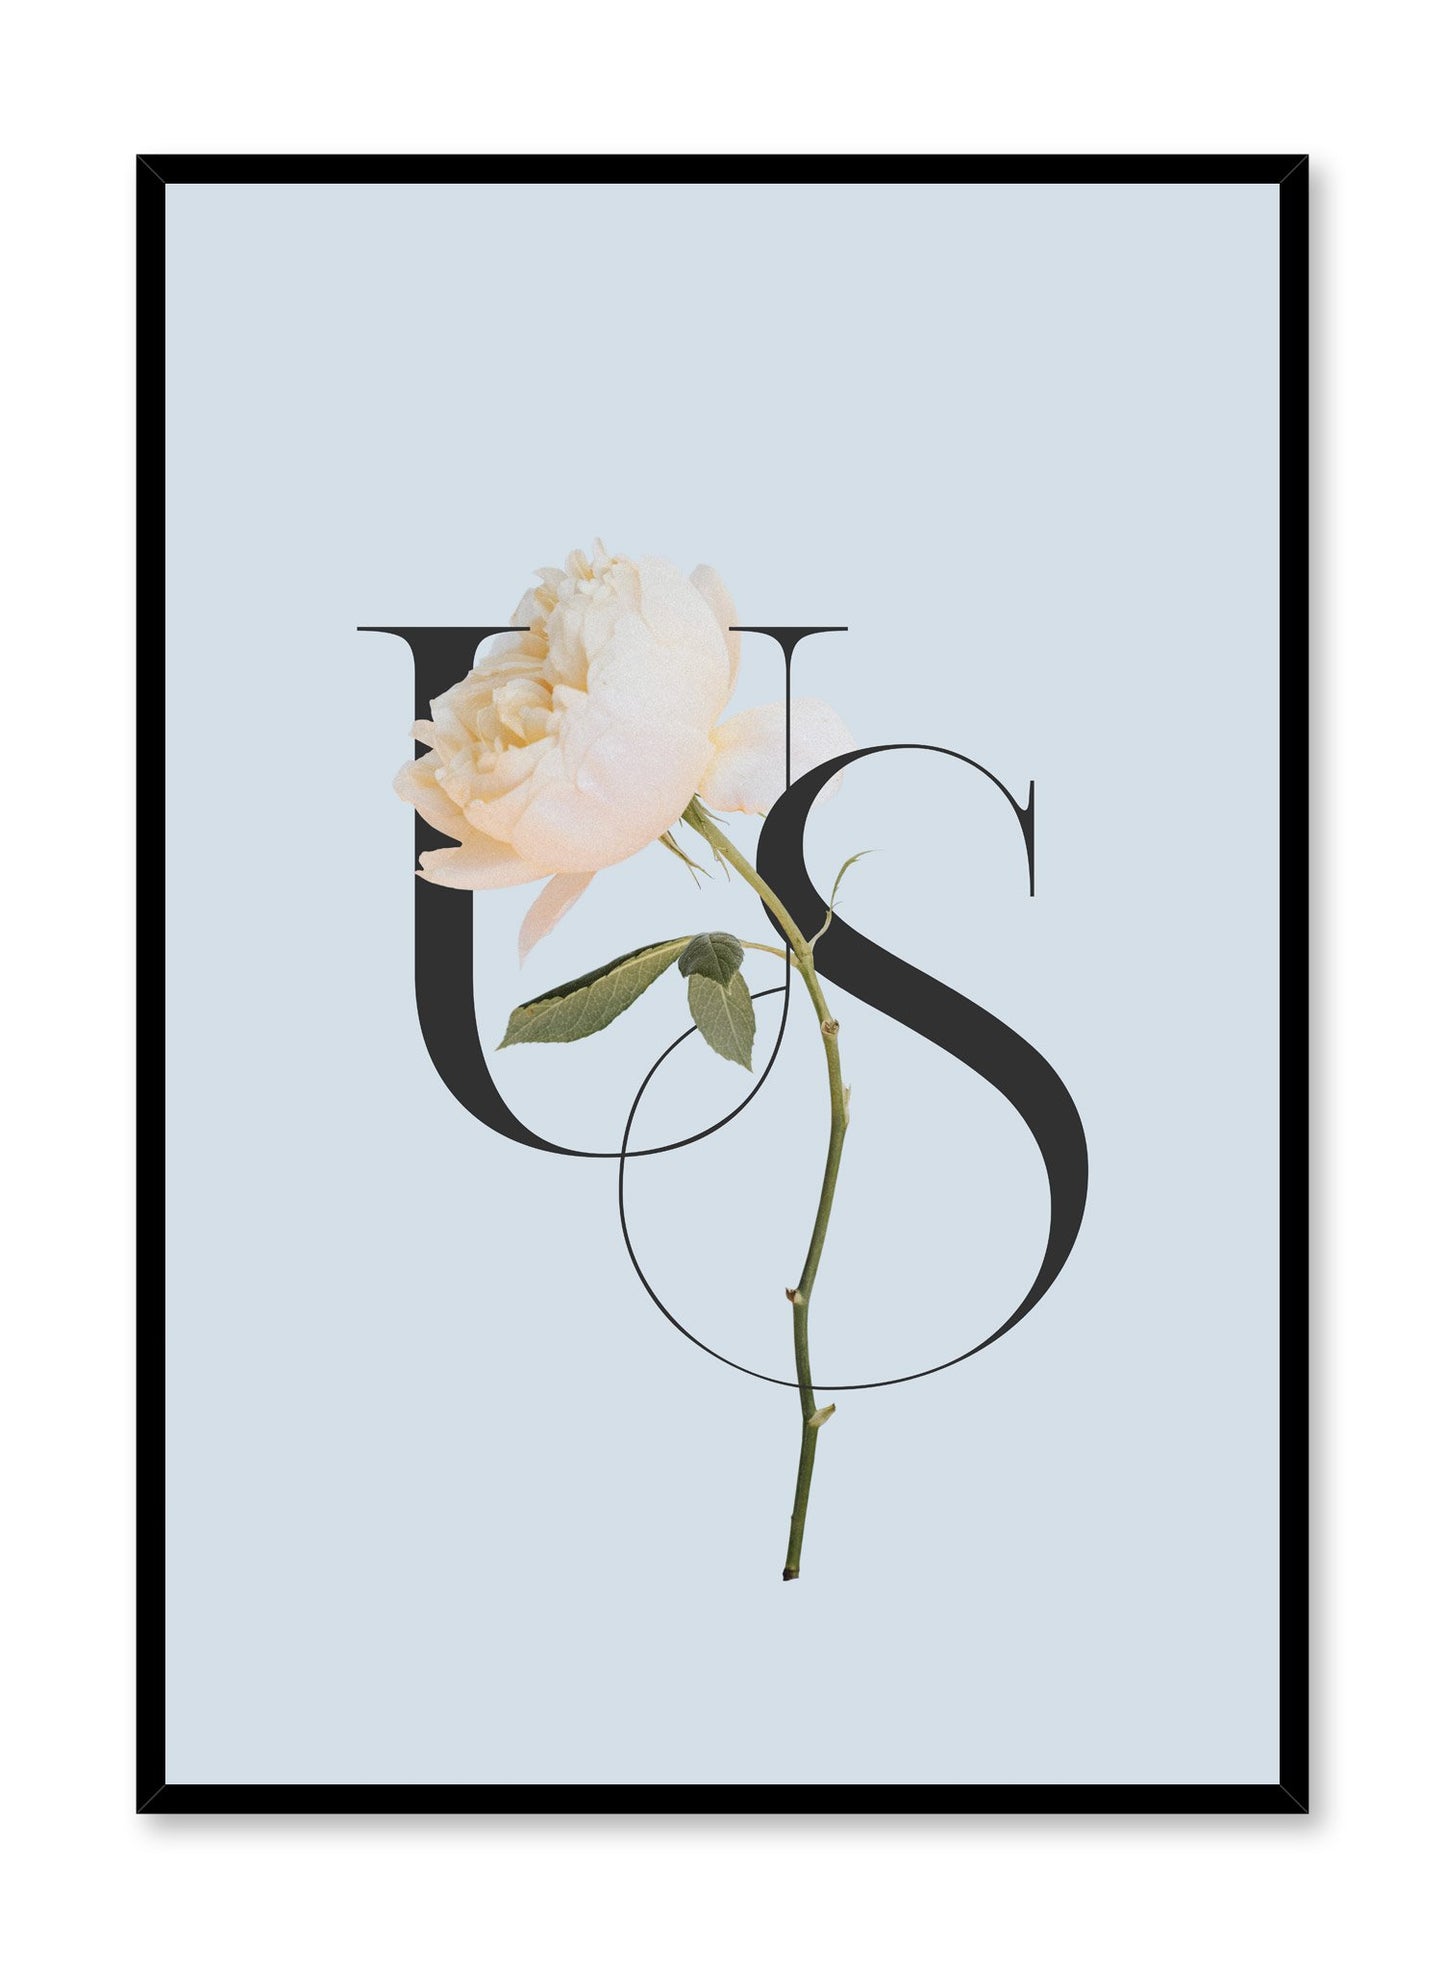 "Us" is a minimalist blue, cream and black typography poster by Opposite Wall of the word ‘us’ layered over a white flower over a baby blue background. 